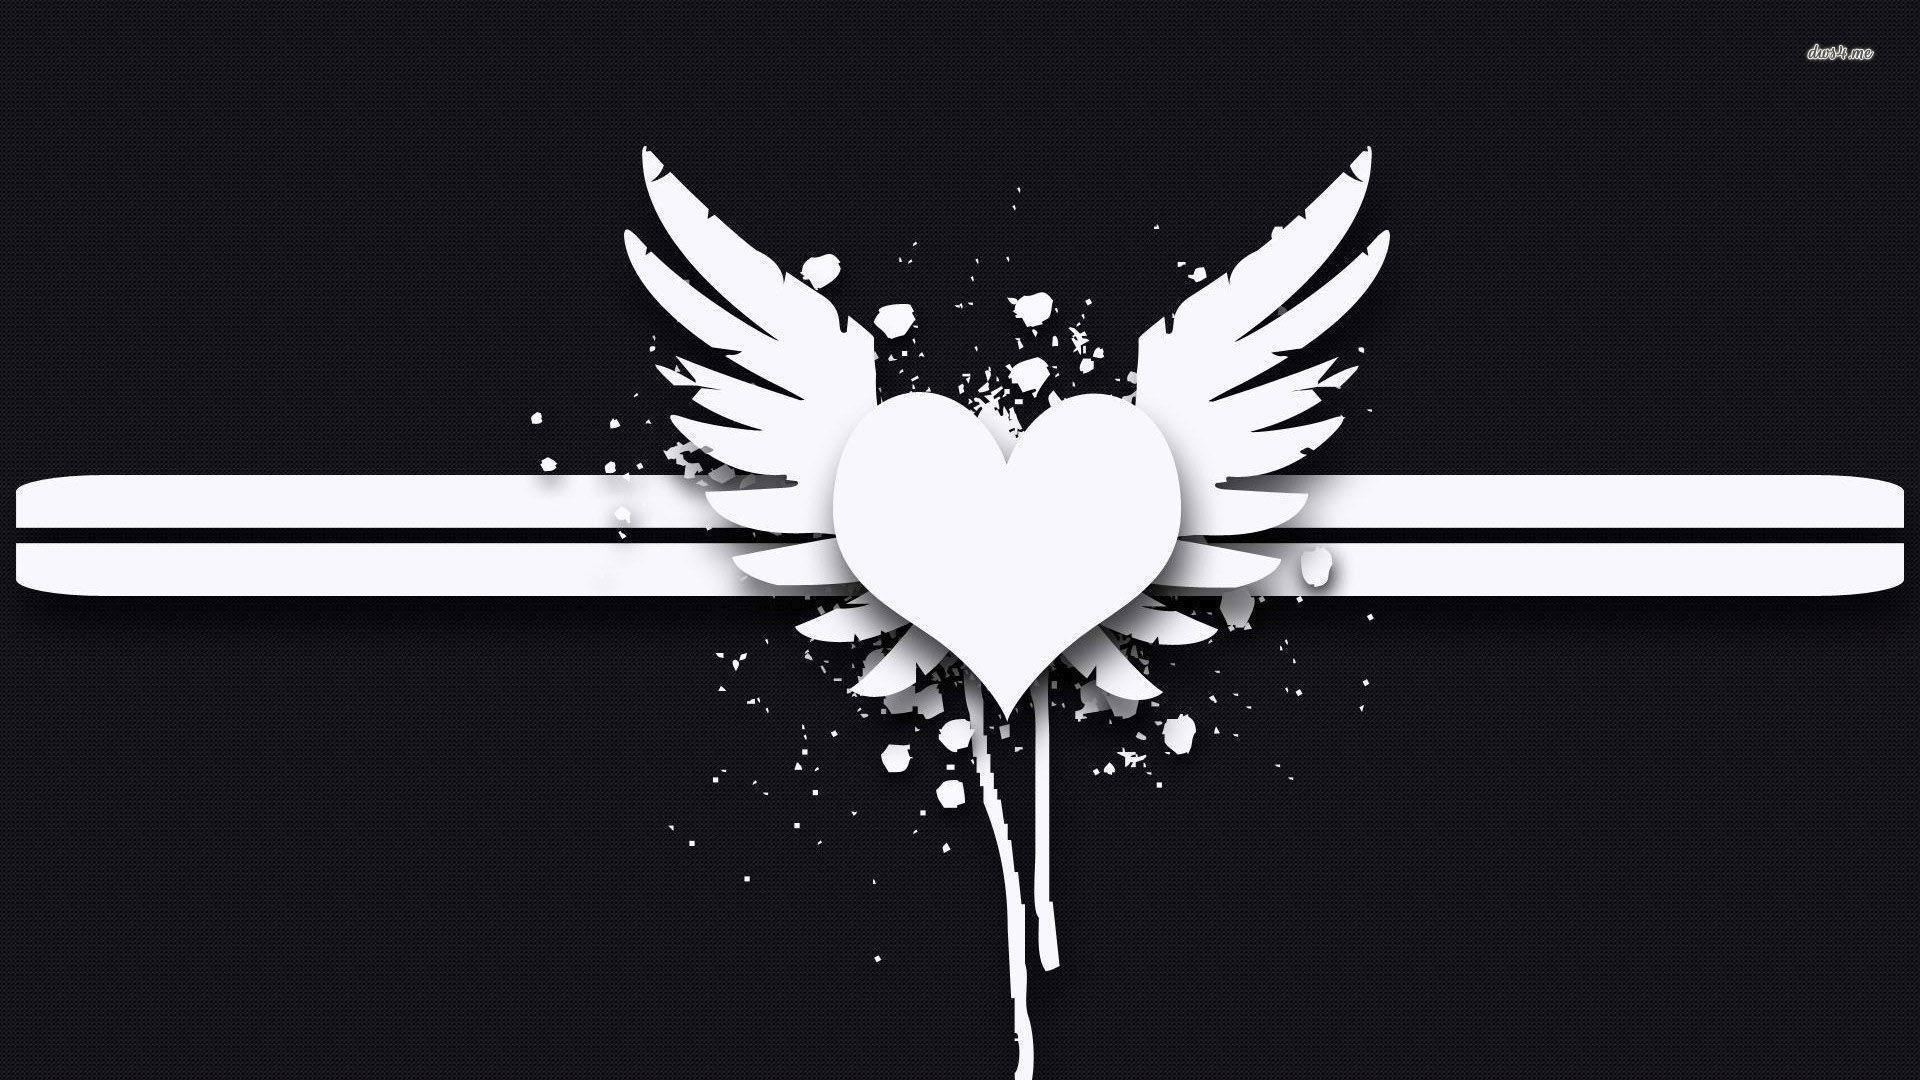 Wings Wallpaper HD (Picture)